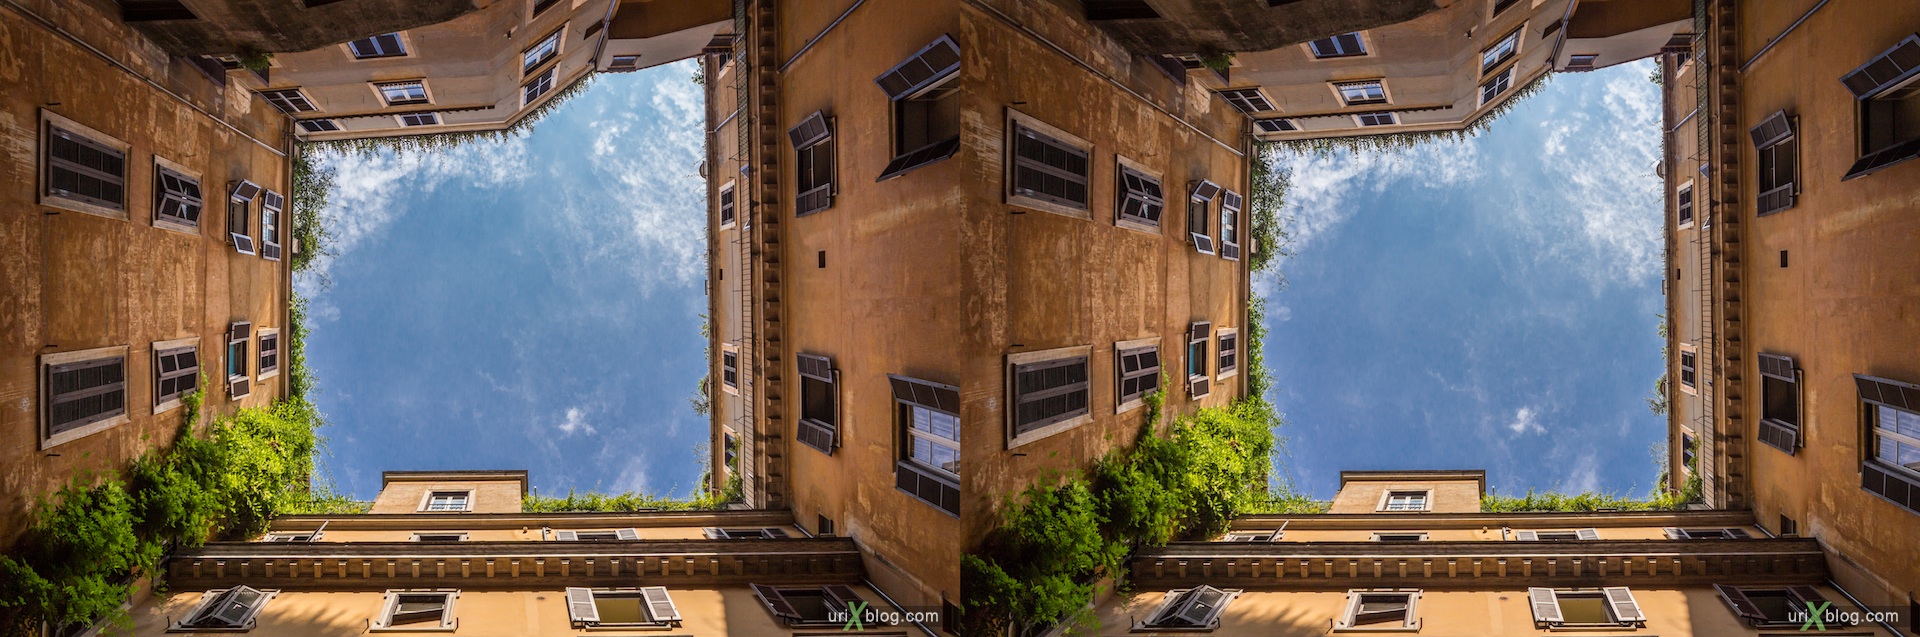 2012, Via del Pozzo street, courtyard, patio, sky, Rome, Italy, 3D, stereo pair, cross-eyed, crossview, cross view stereo pair